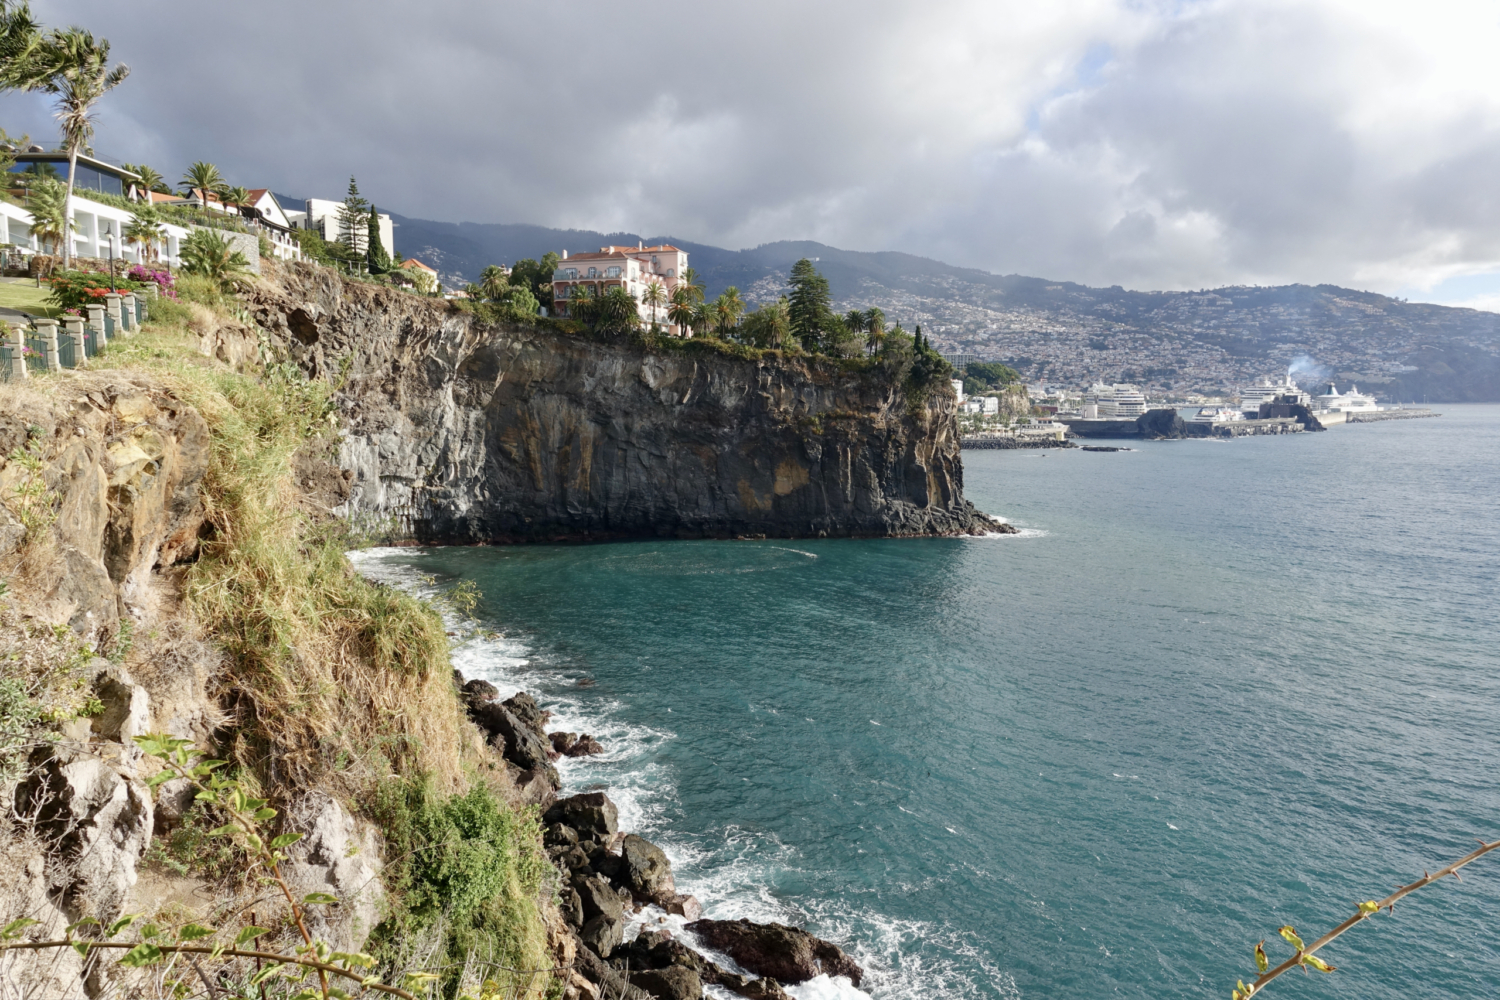 Madeira Portugal: 2 luxury hotels in the front, the capital of Funchal in the back